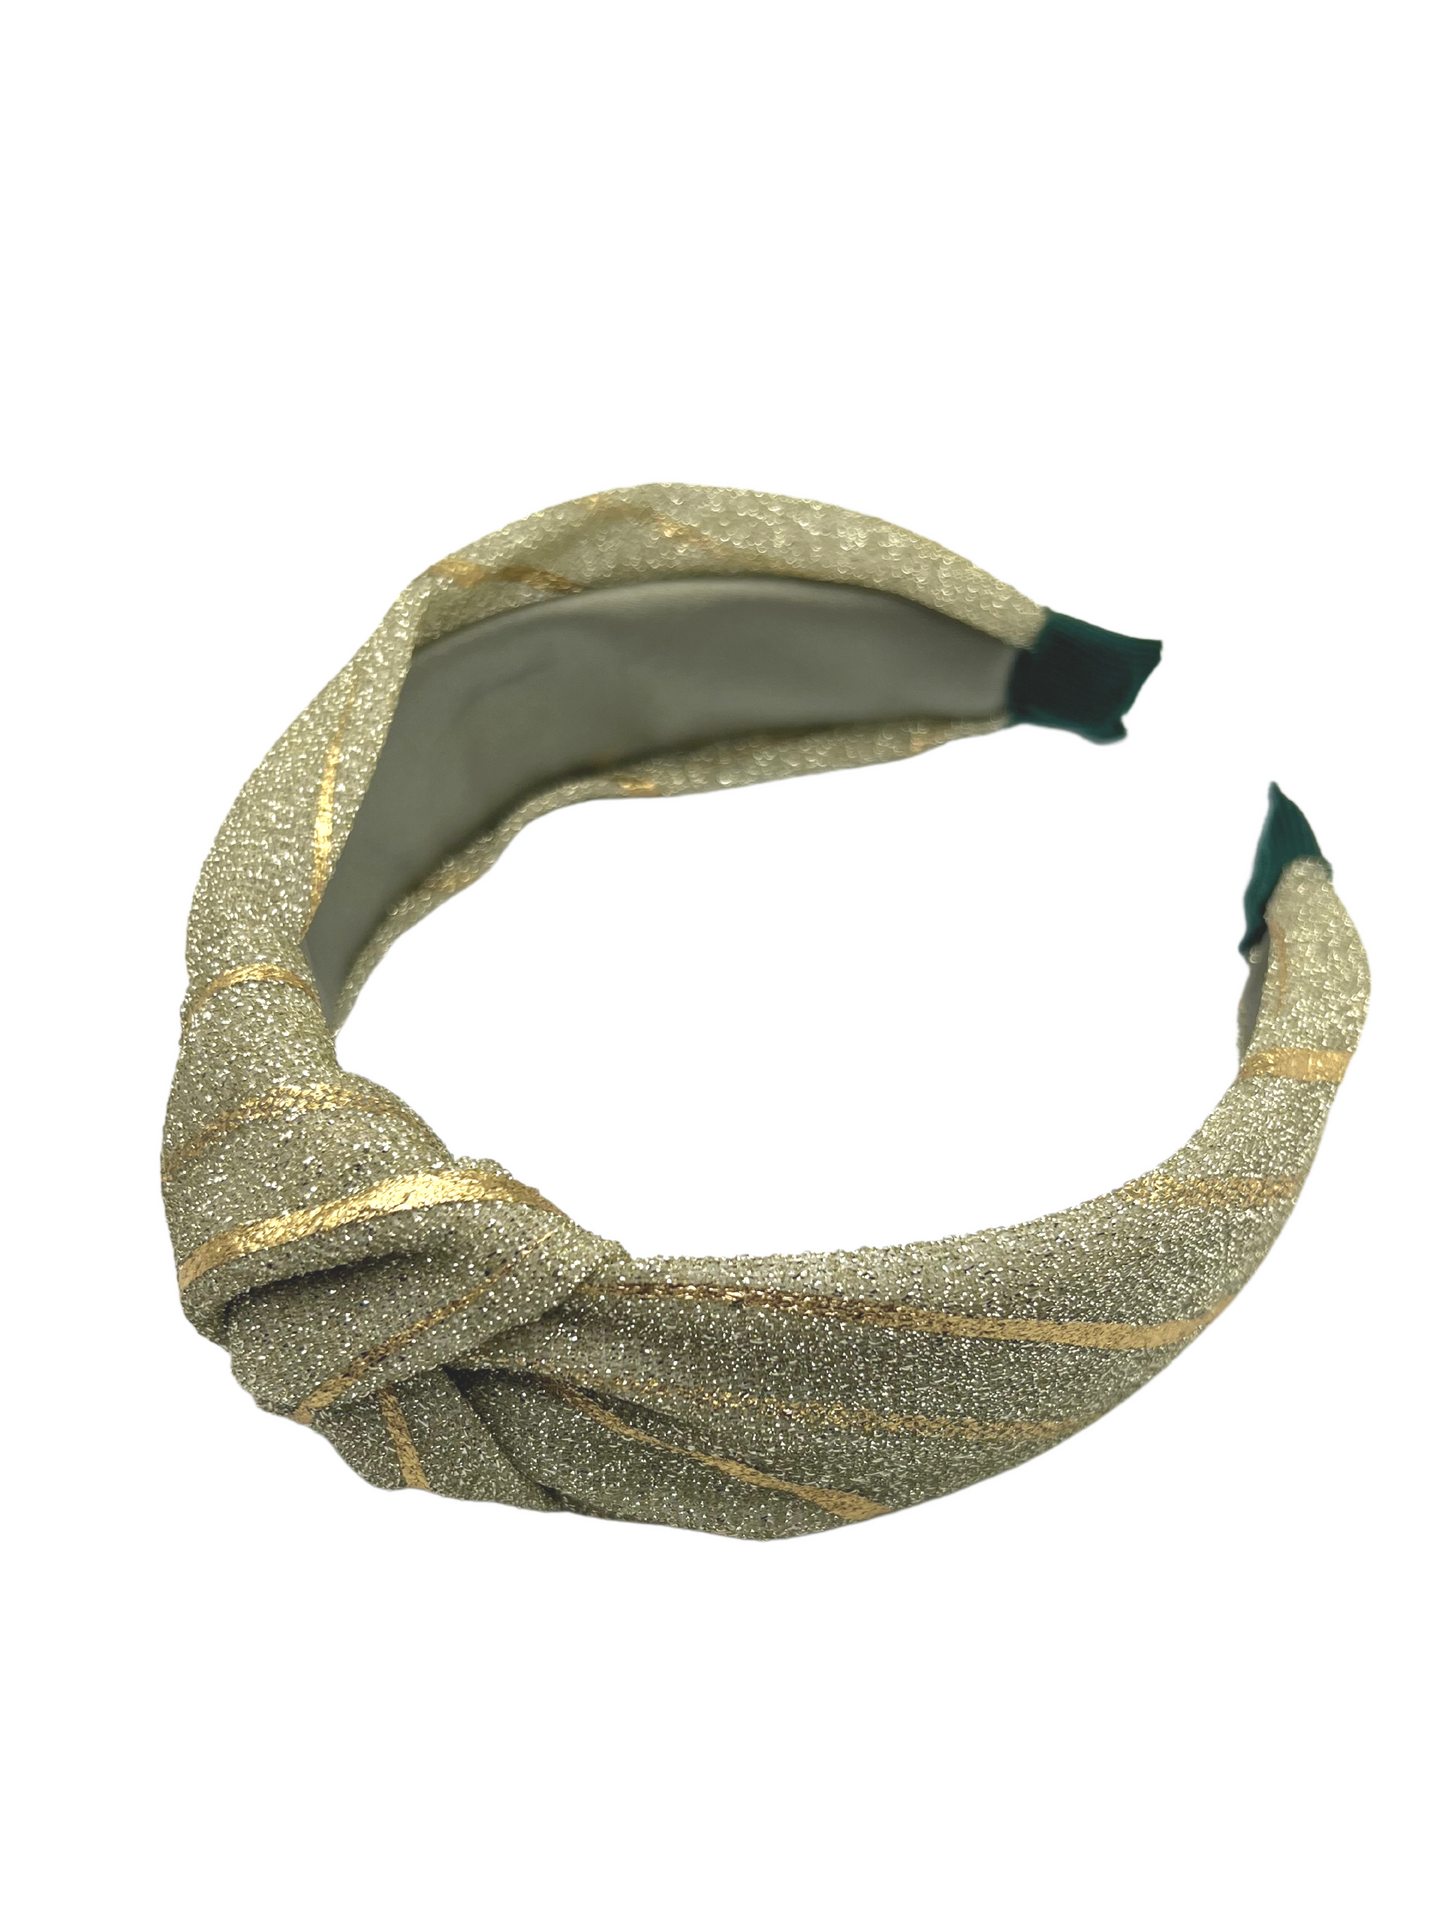 Top-Knot Headband - Glitter and Gold